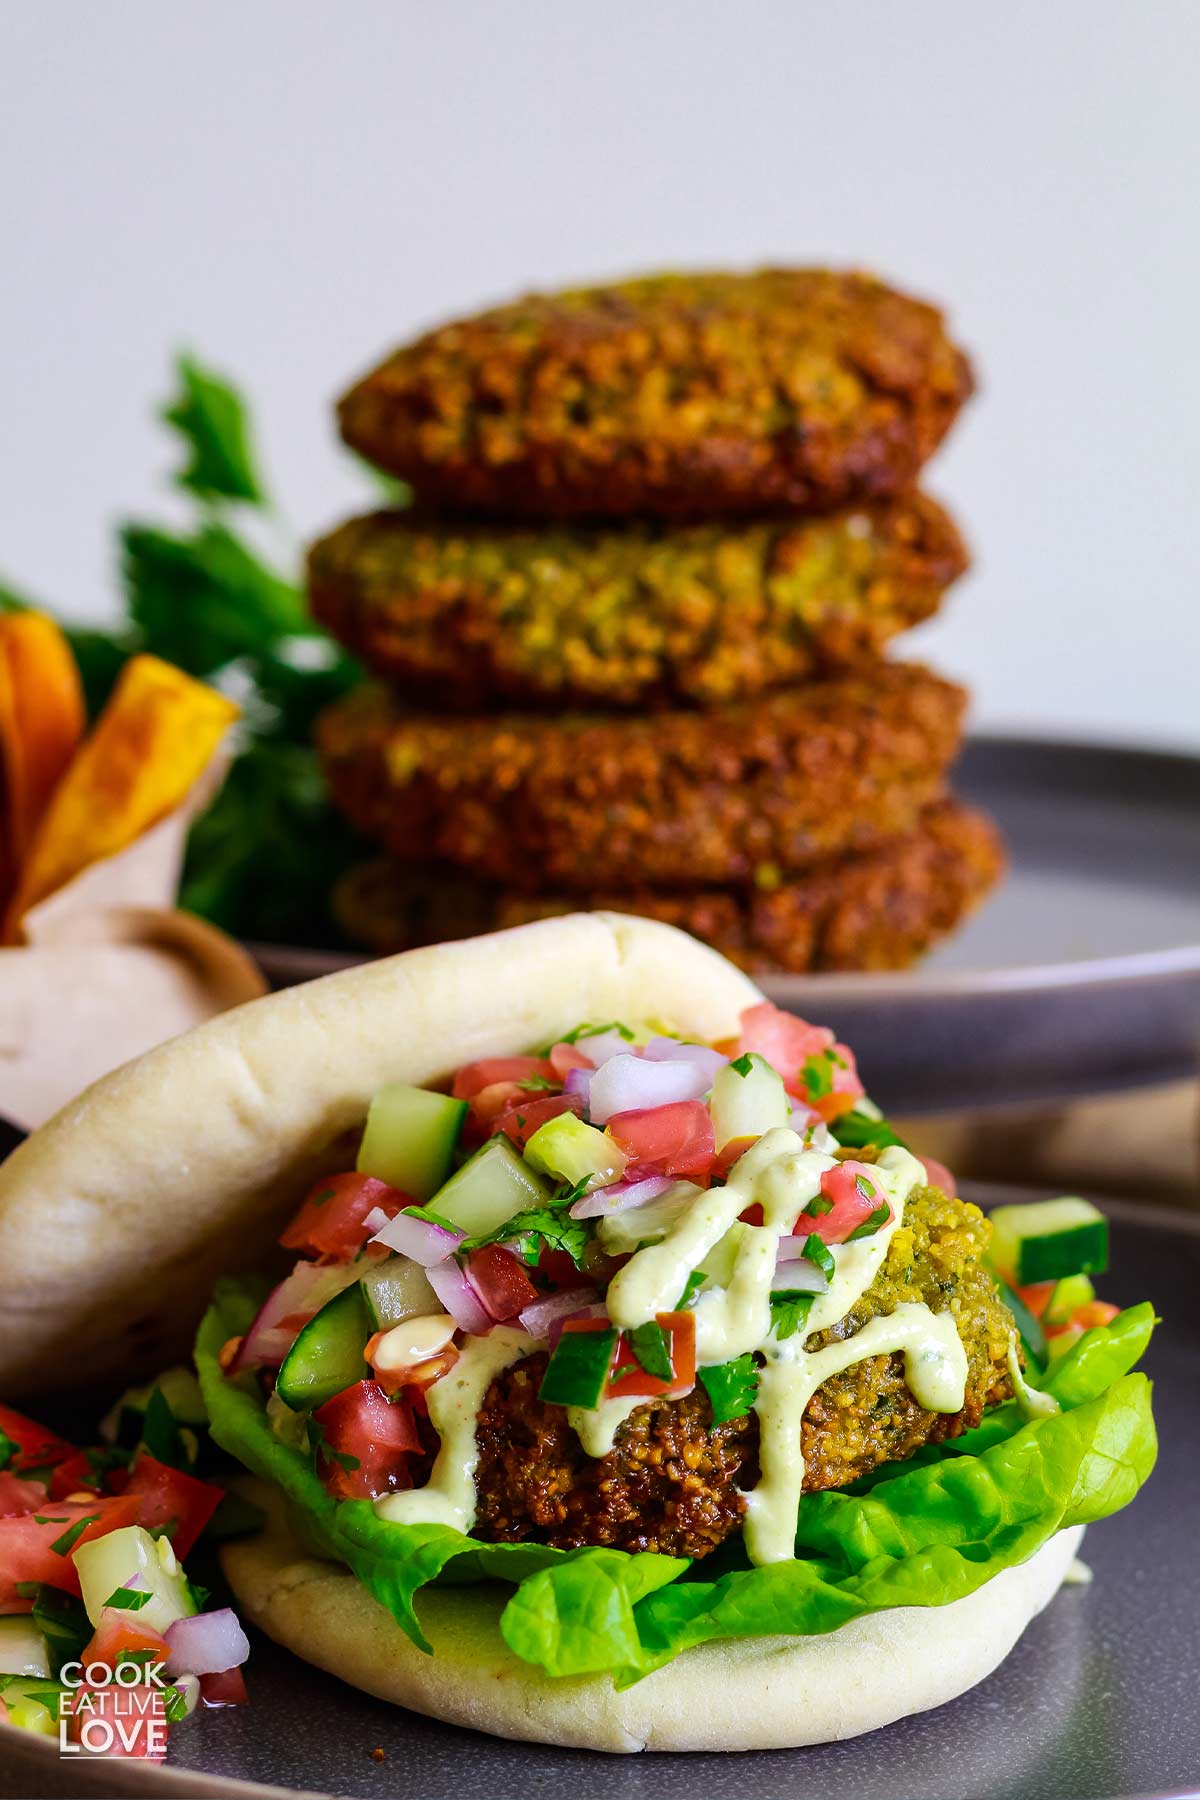 Front view of finished vegan falafel burger.  Stack of patties in back.